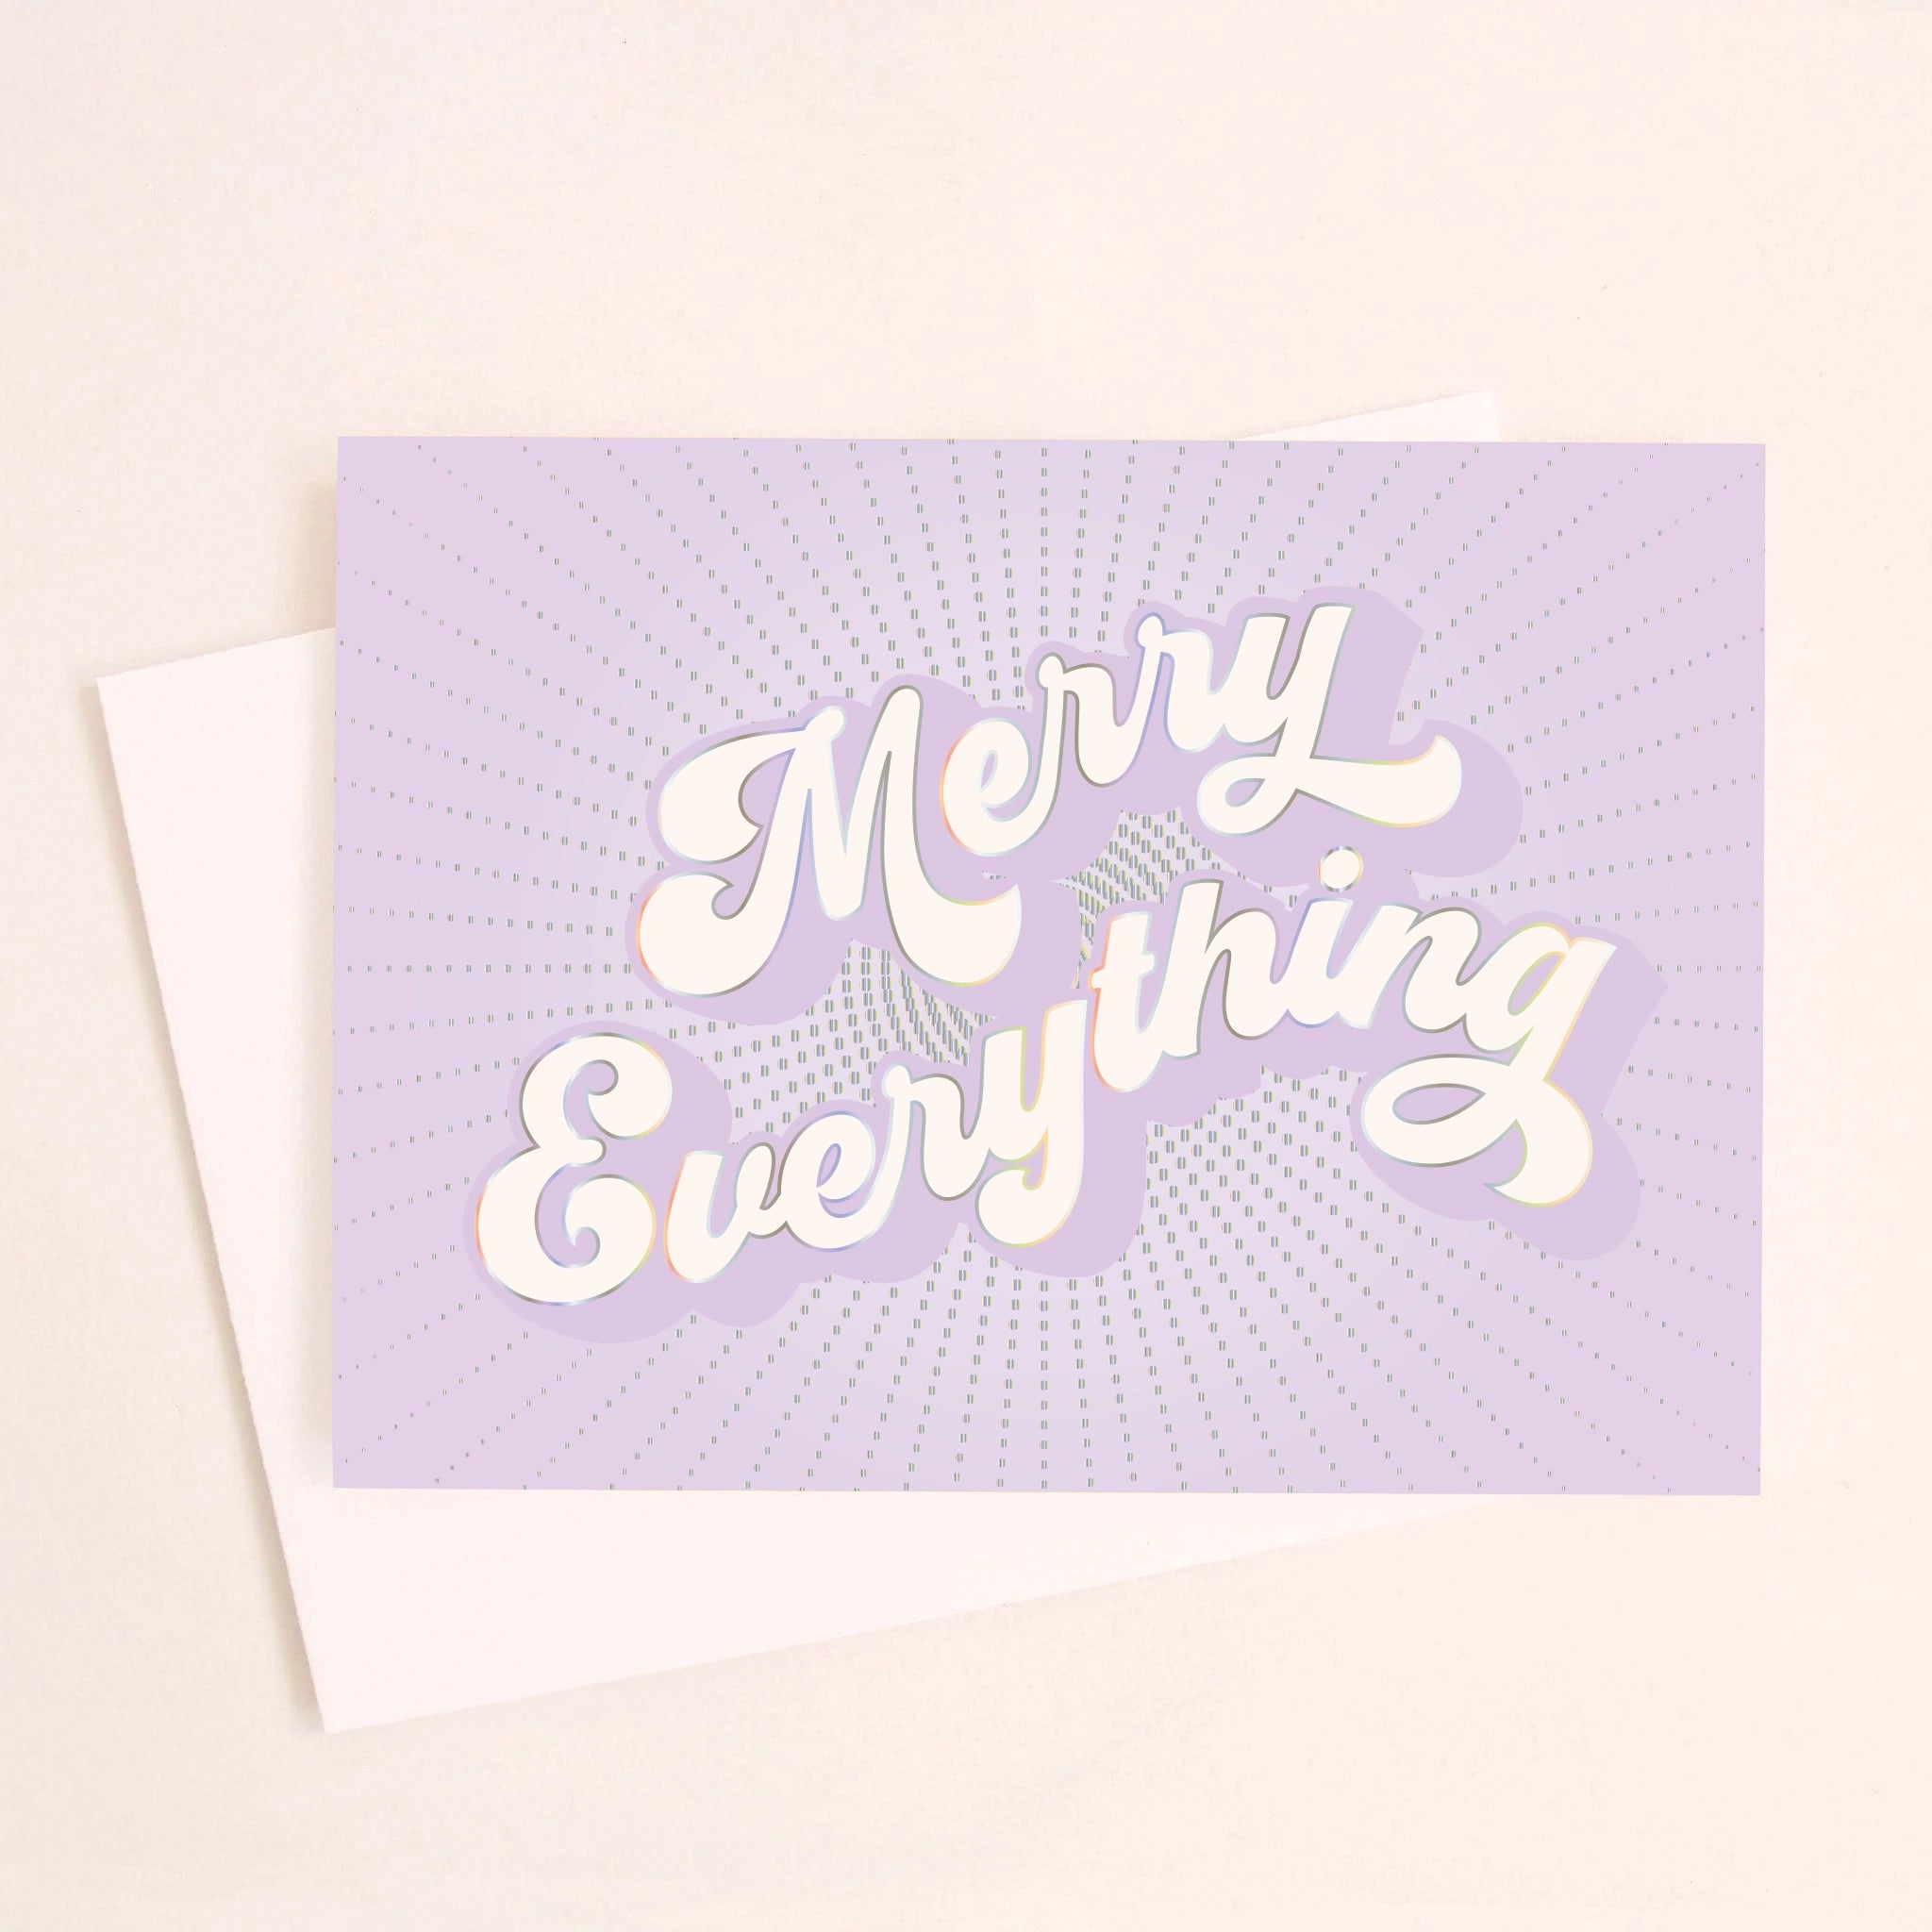 On a light pink background is a purple greeting card with white text that reads, "Merry Everything" along with a white envelope.